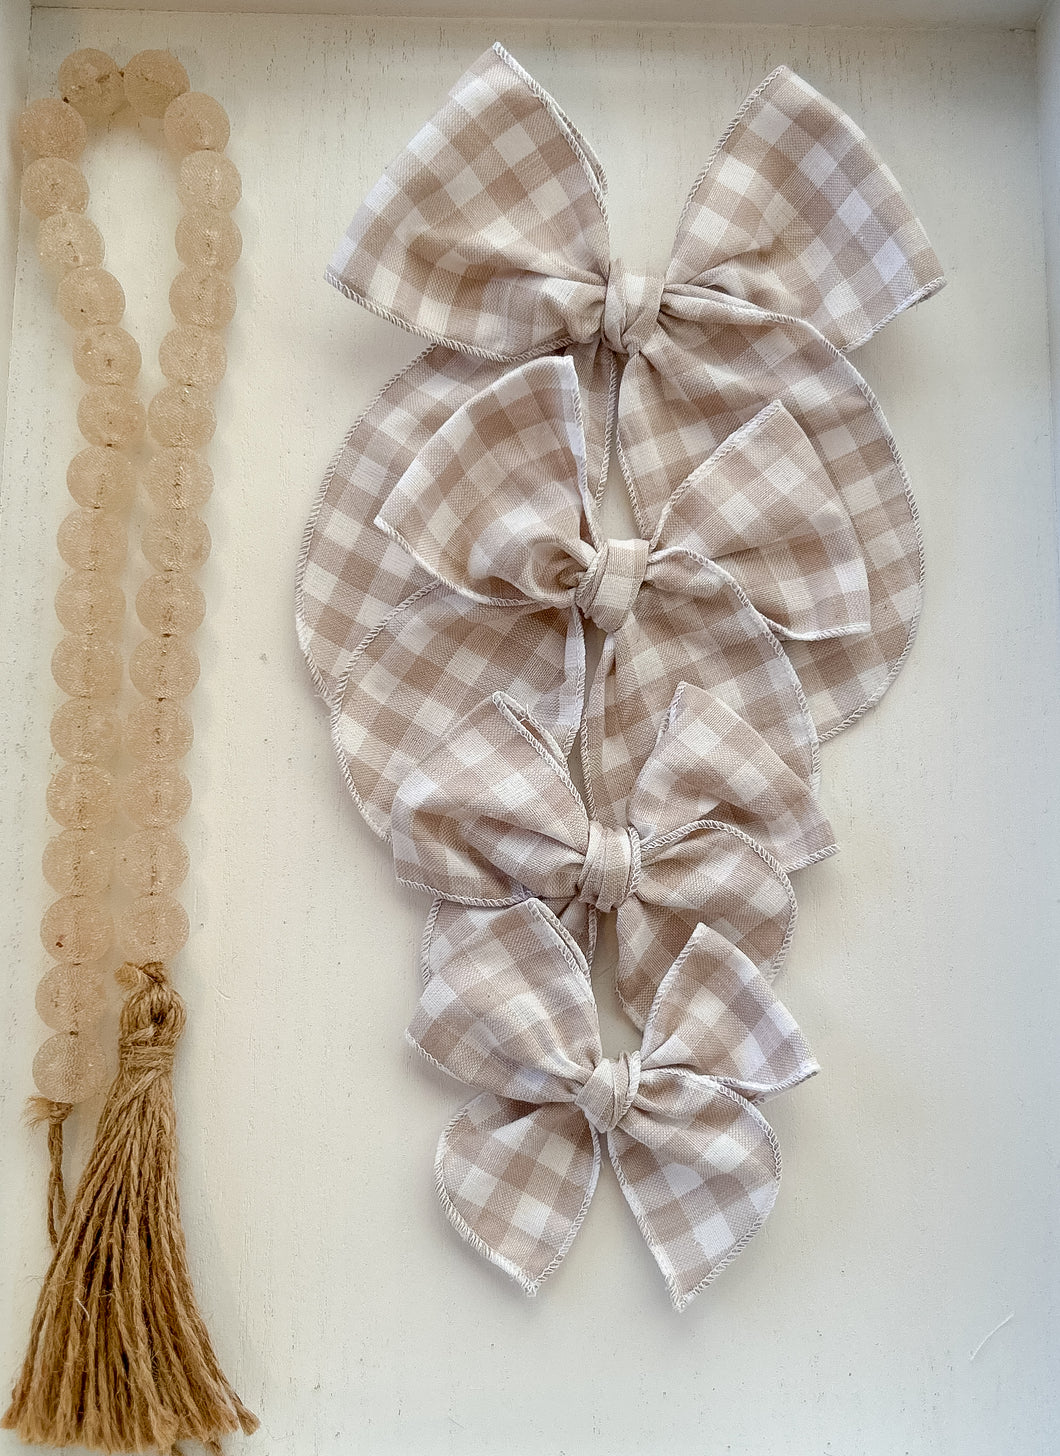 The Beige Gingham Bow